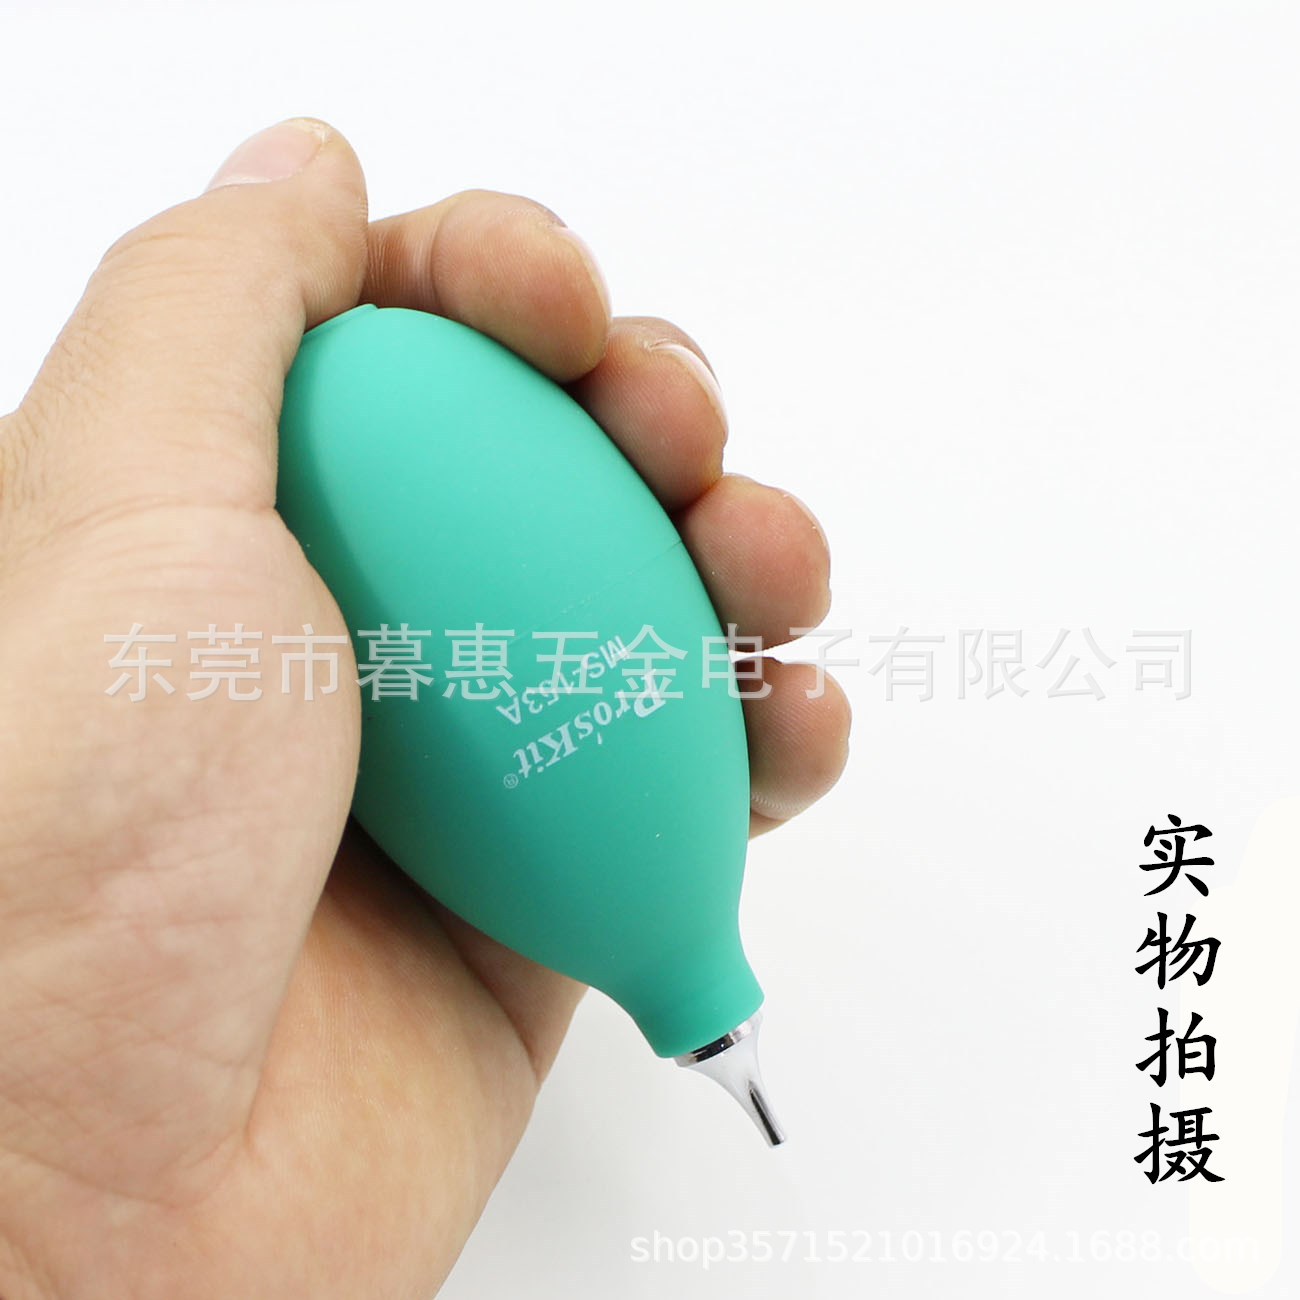 Taiwan Po MS-153A Hair Ball Paper Tiger Dust blower Blowing balloons Blowing Computer keyboard remove dust clean